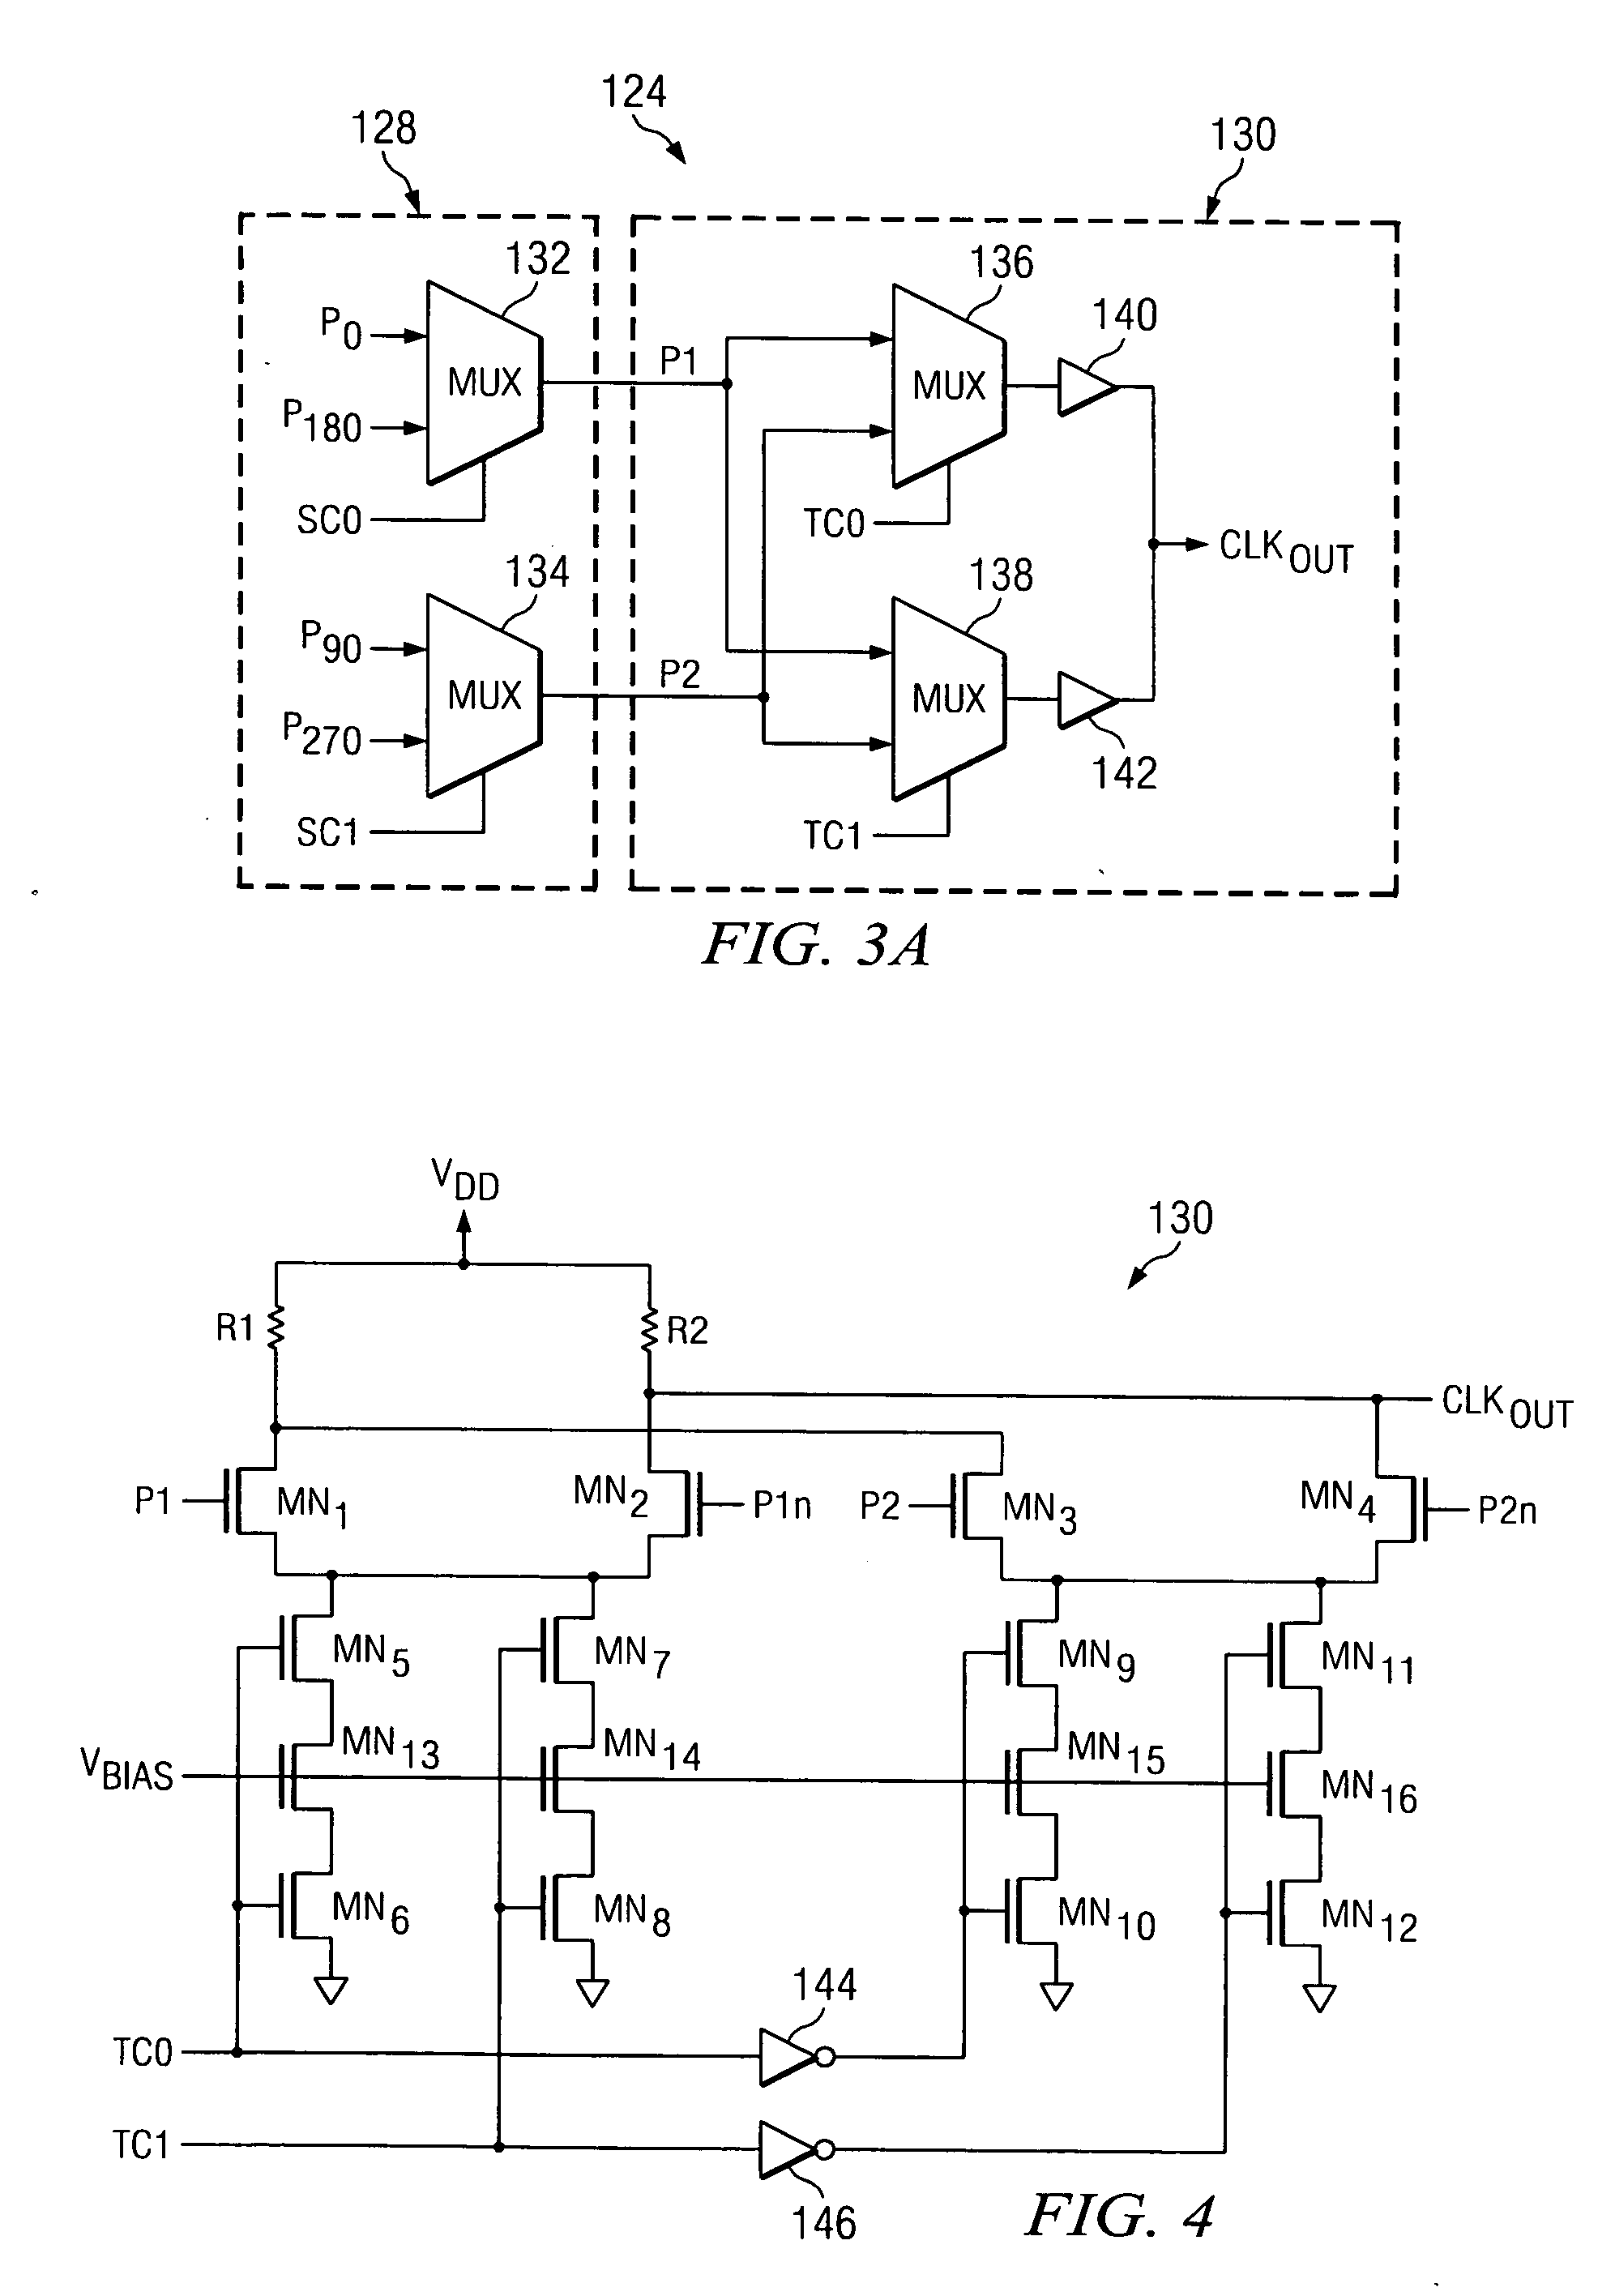 Built-in self test method and apparatus for jitter transfer, jitter tolerance, and FIFO data buffer